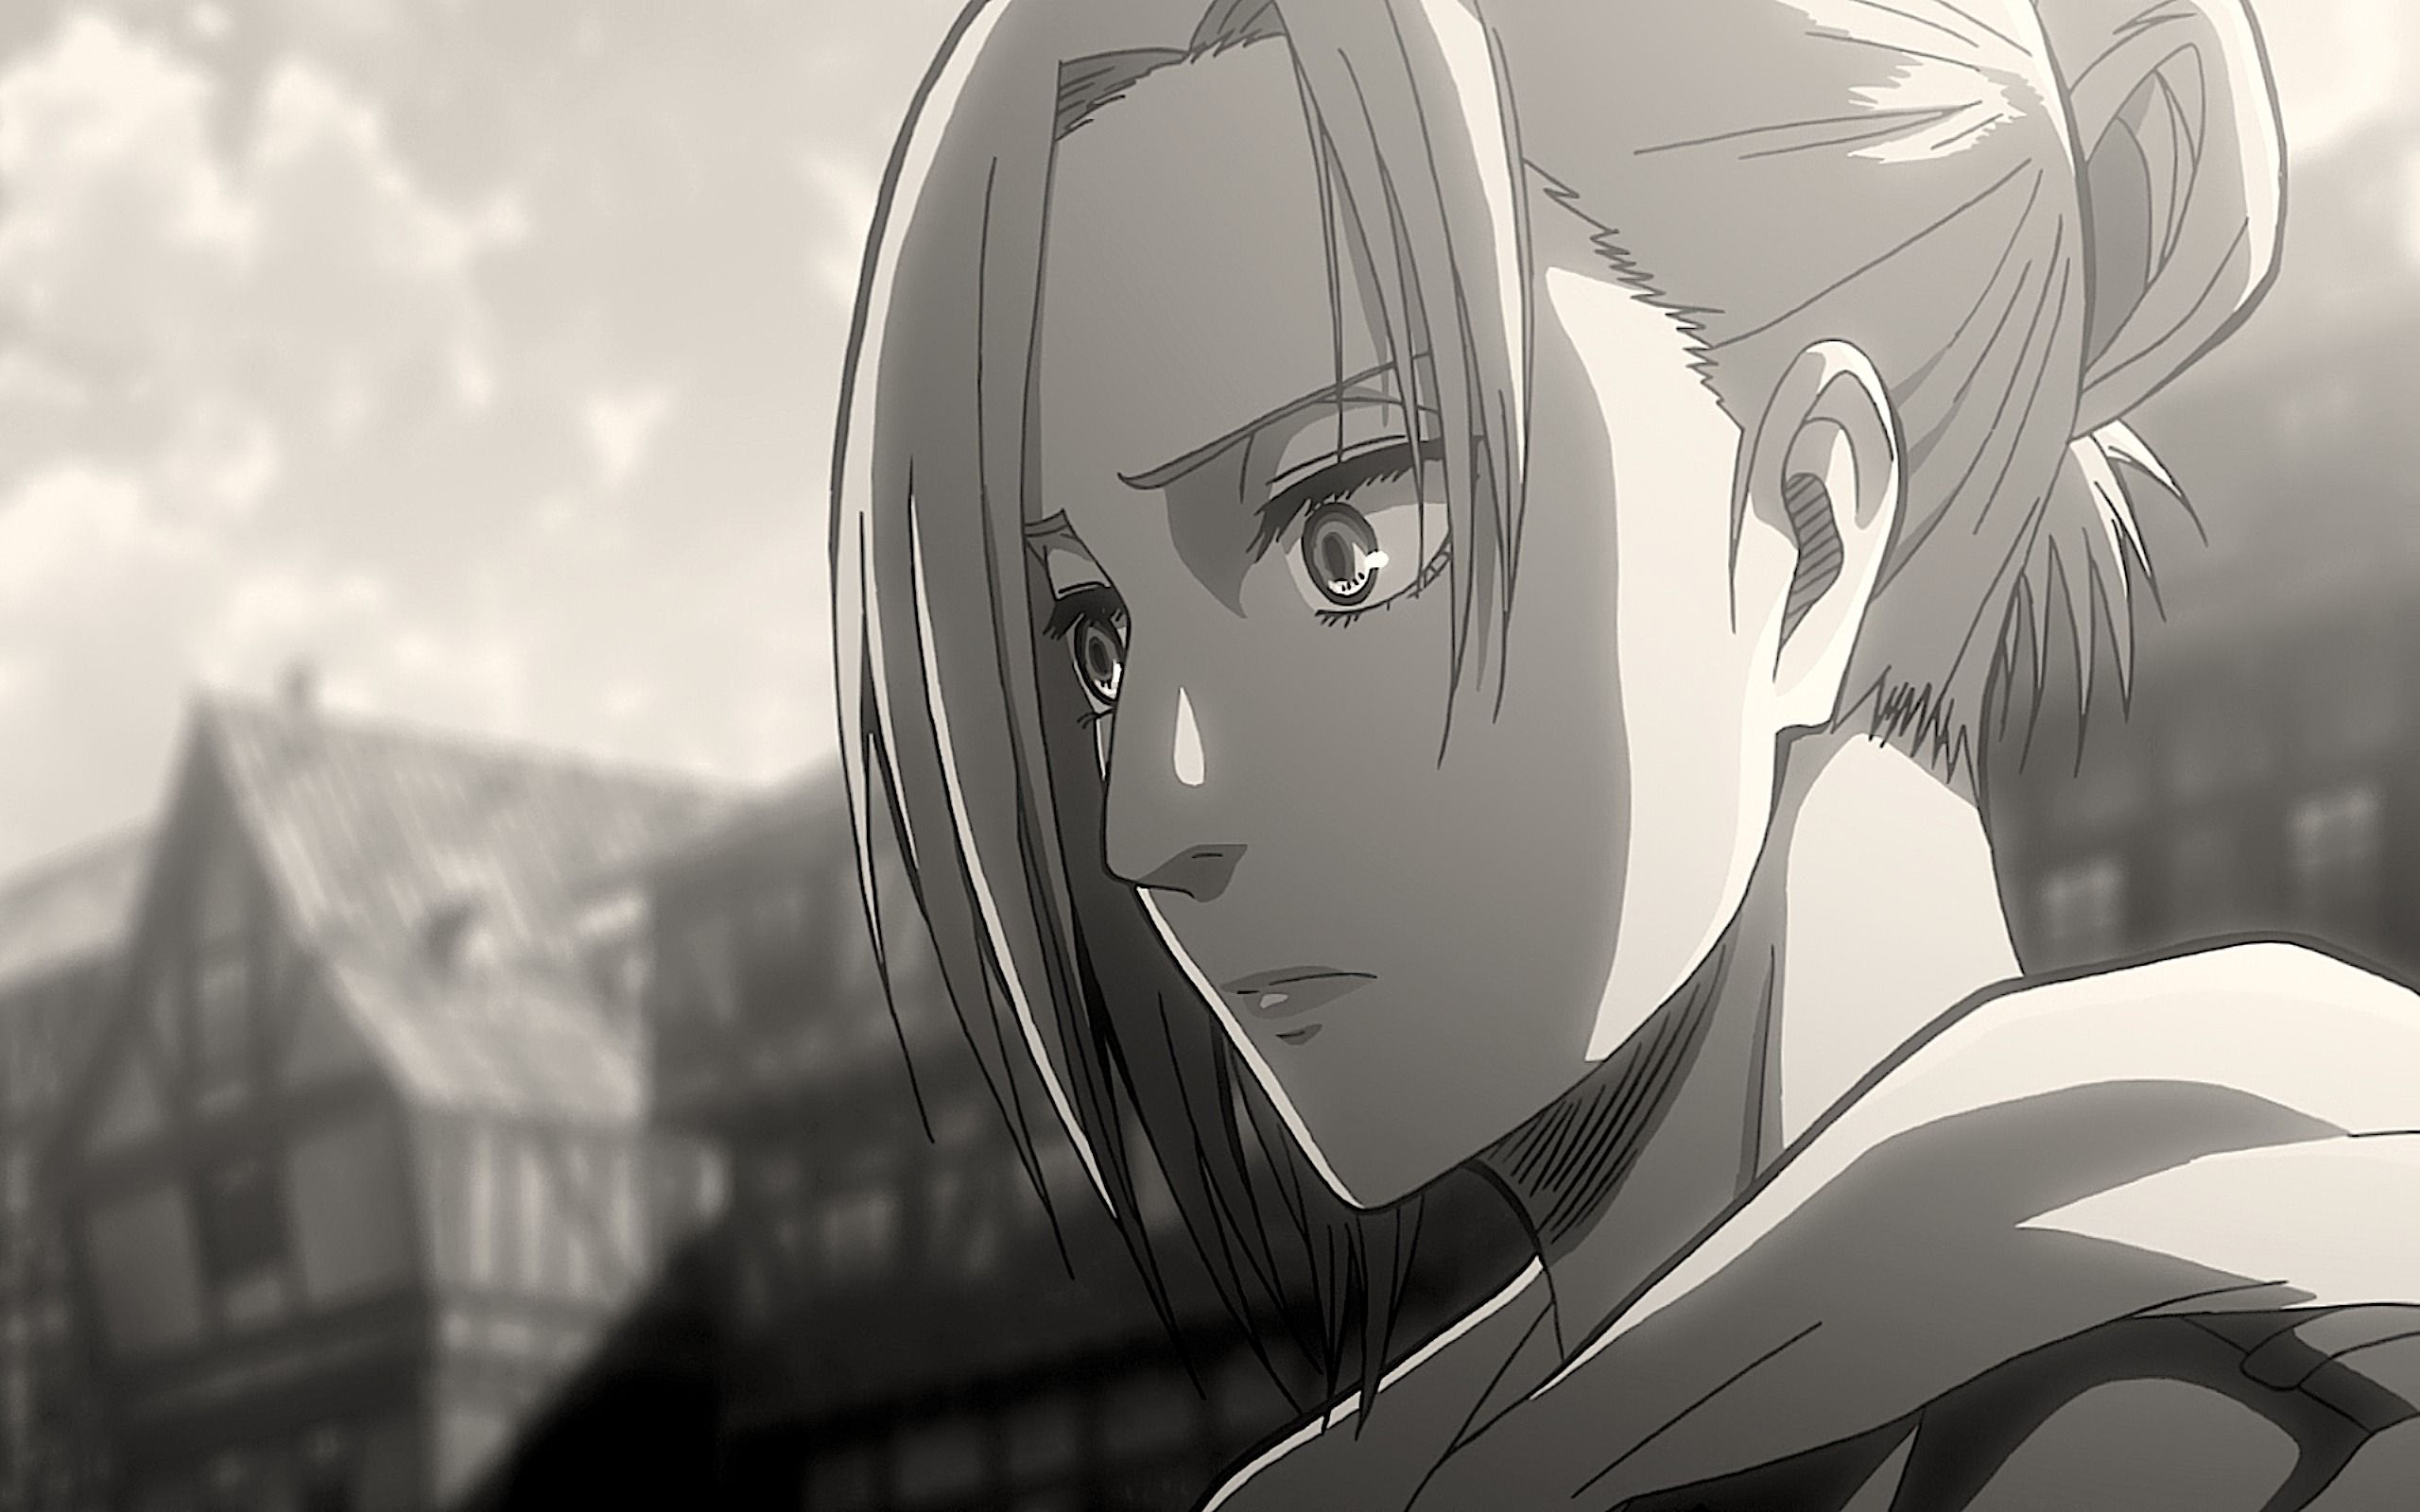 Download wallpaper from anime Attack On Titan with tags: Black & White, Linux, Annie Leonhart, Shingeki No Kyojin